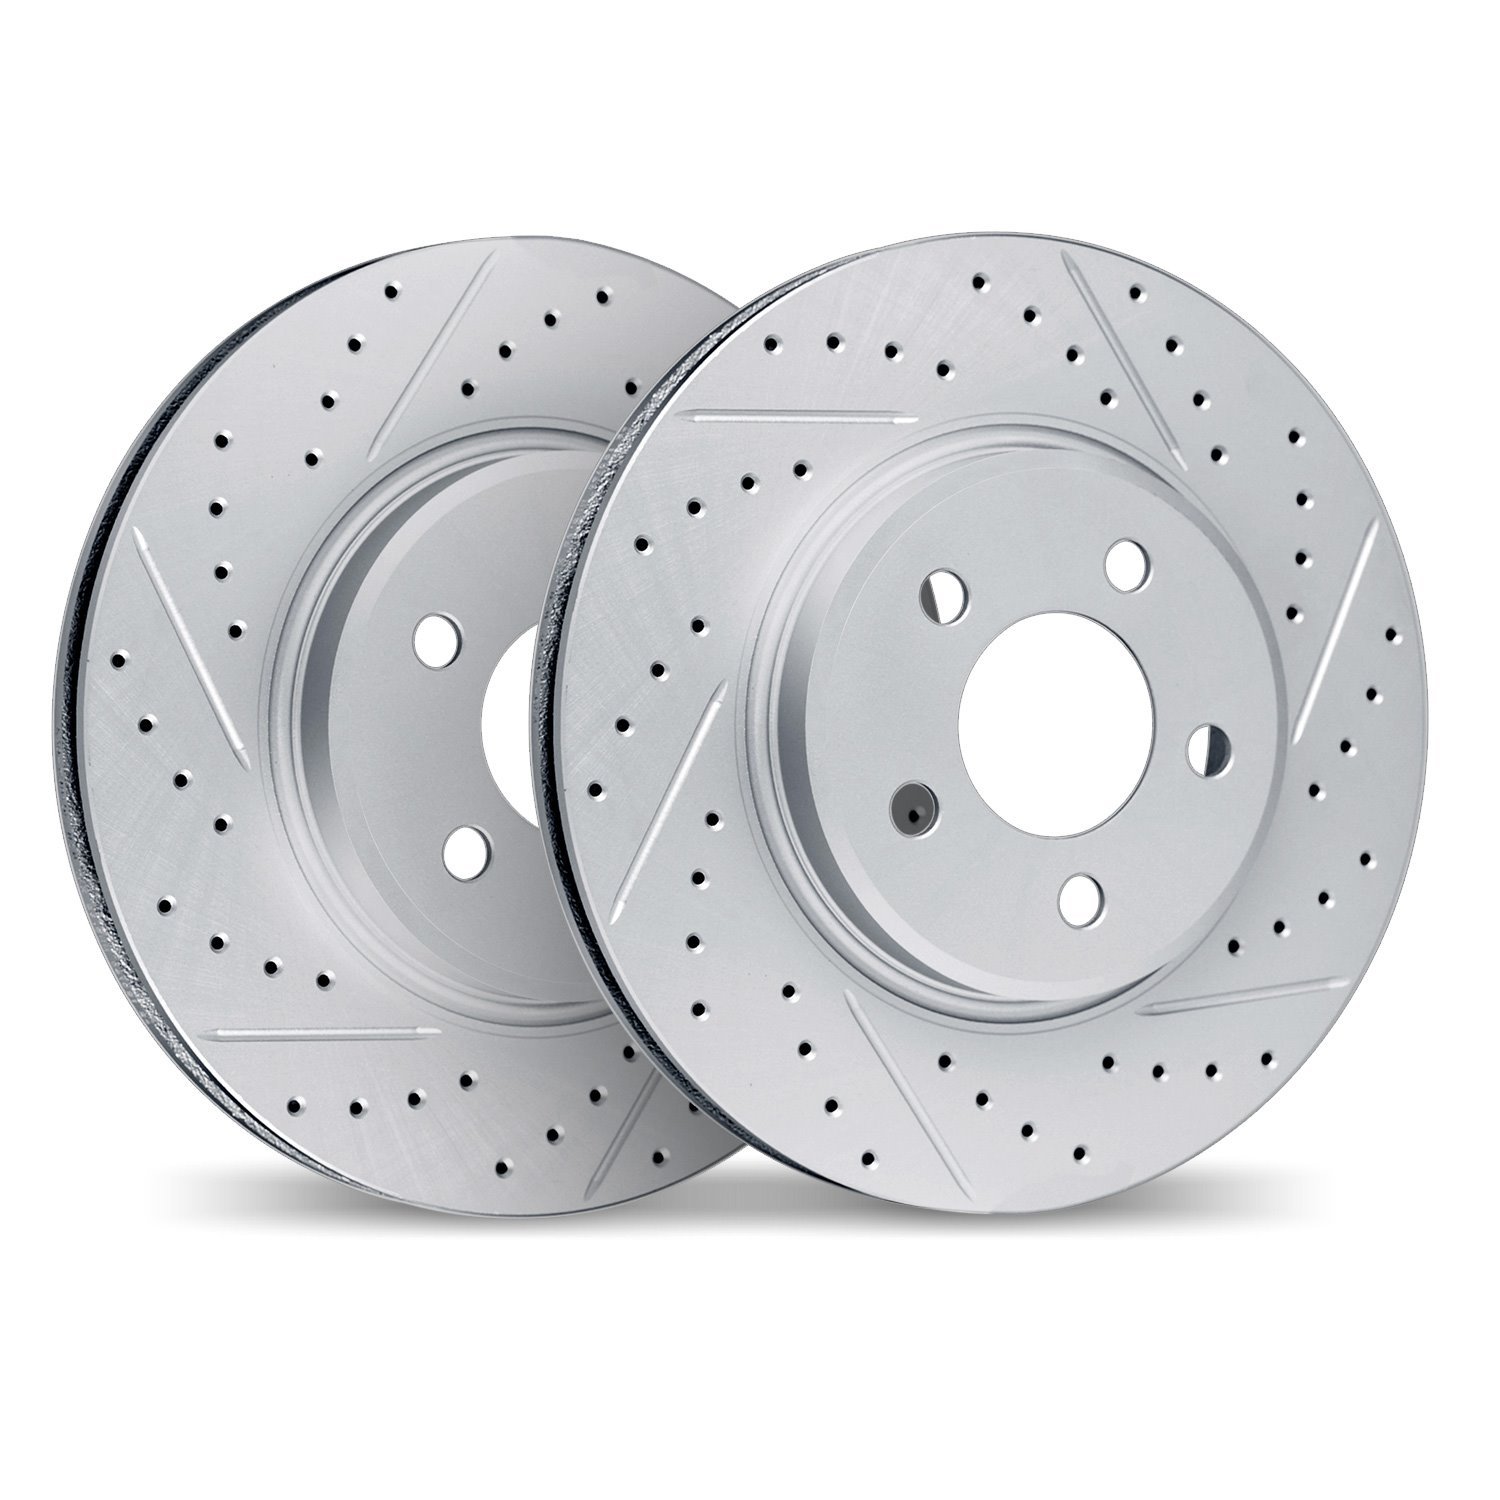 2002-54080 Geoperformance Drilled/Slotted Brake Rotors, 2005-2009 Ford/Lincoln/Mercury/Mazda, Position: Front